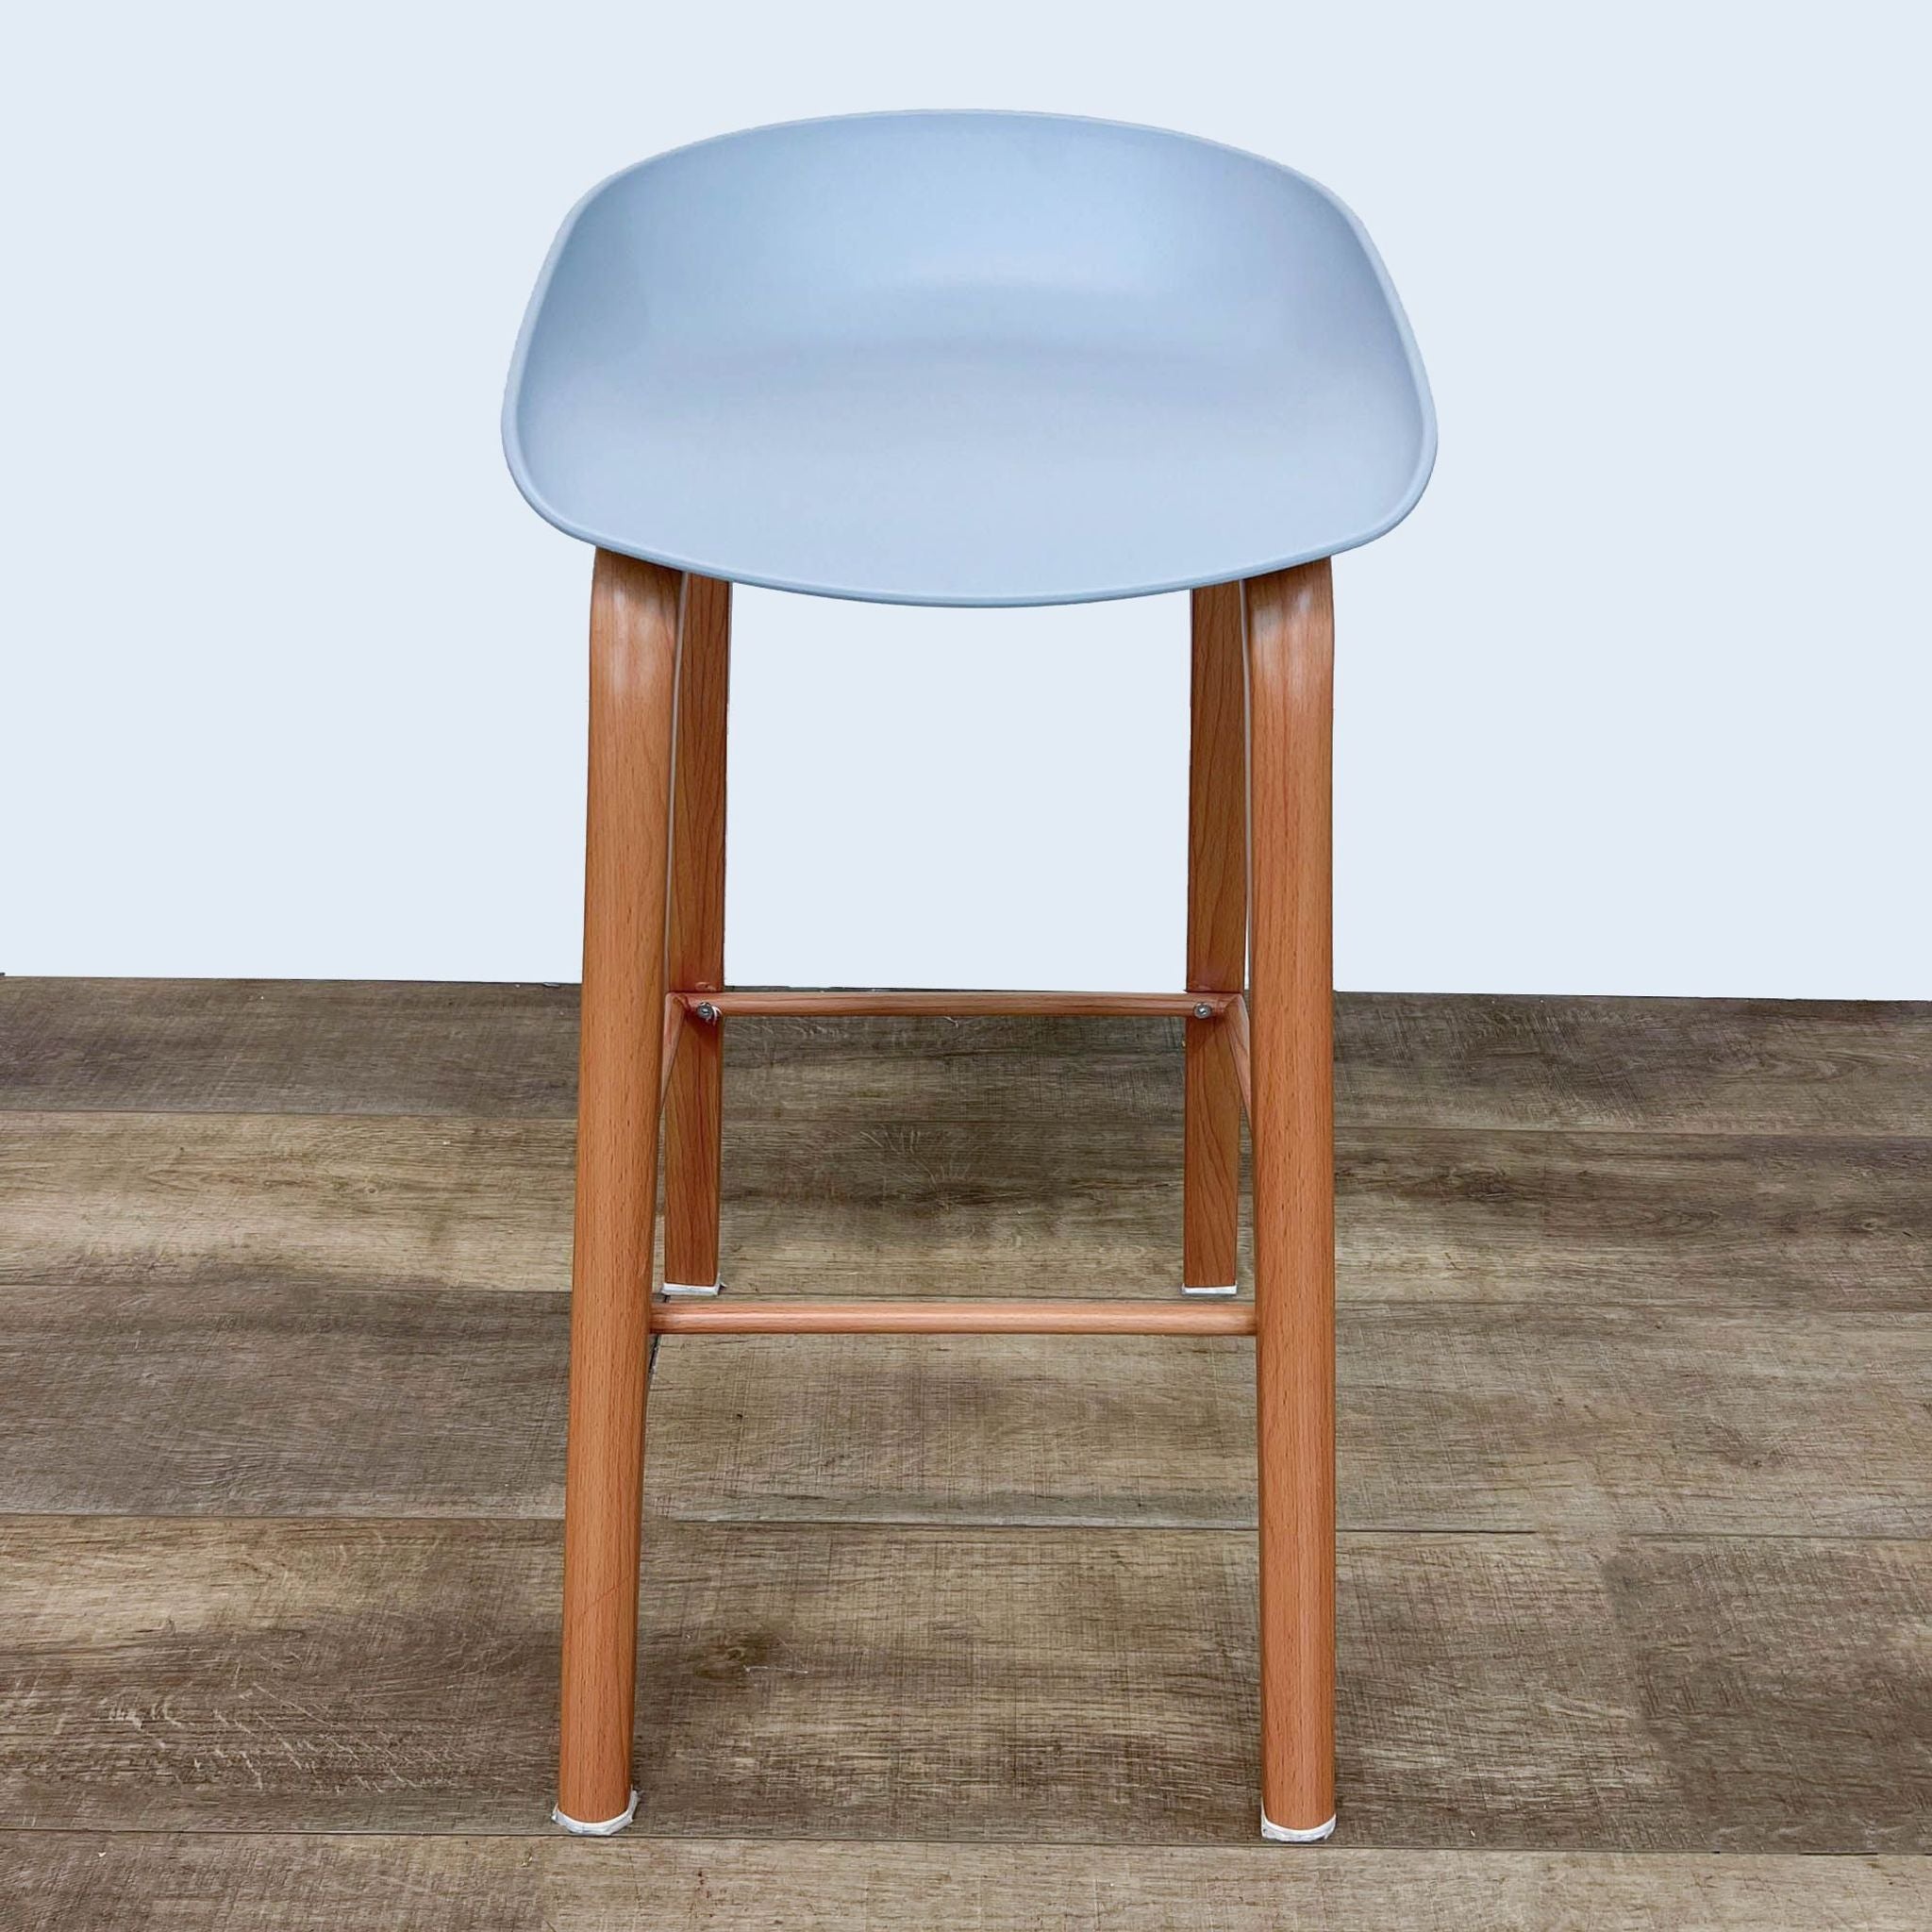 Gray Reperch barstool with minimalistic molded seat on wooden frame, front view.